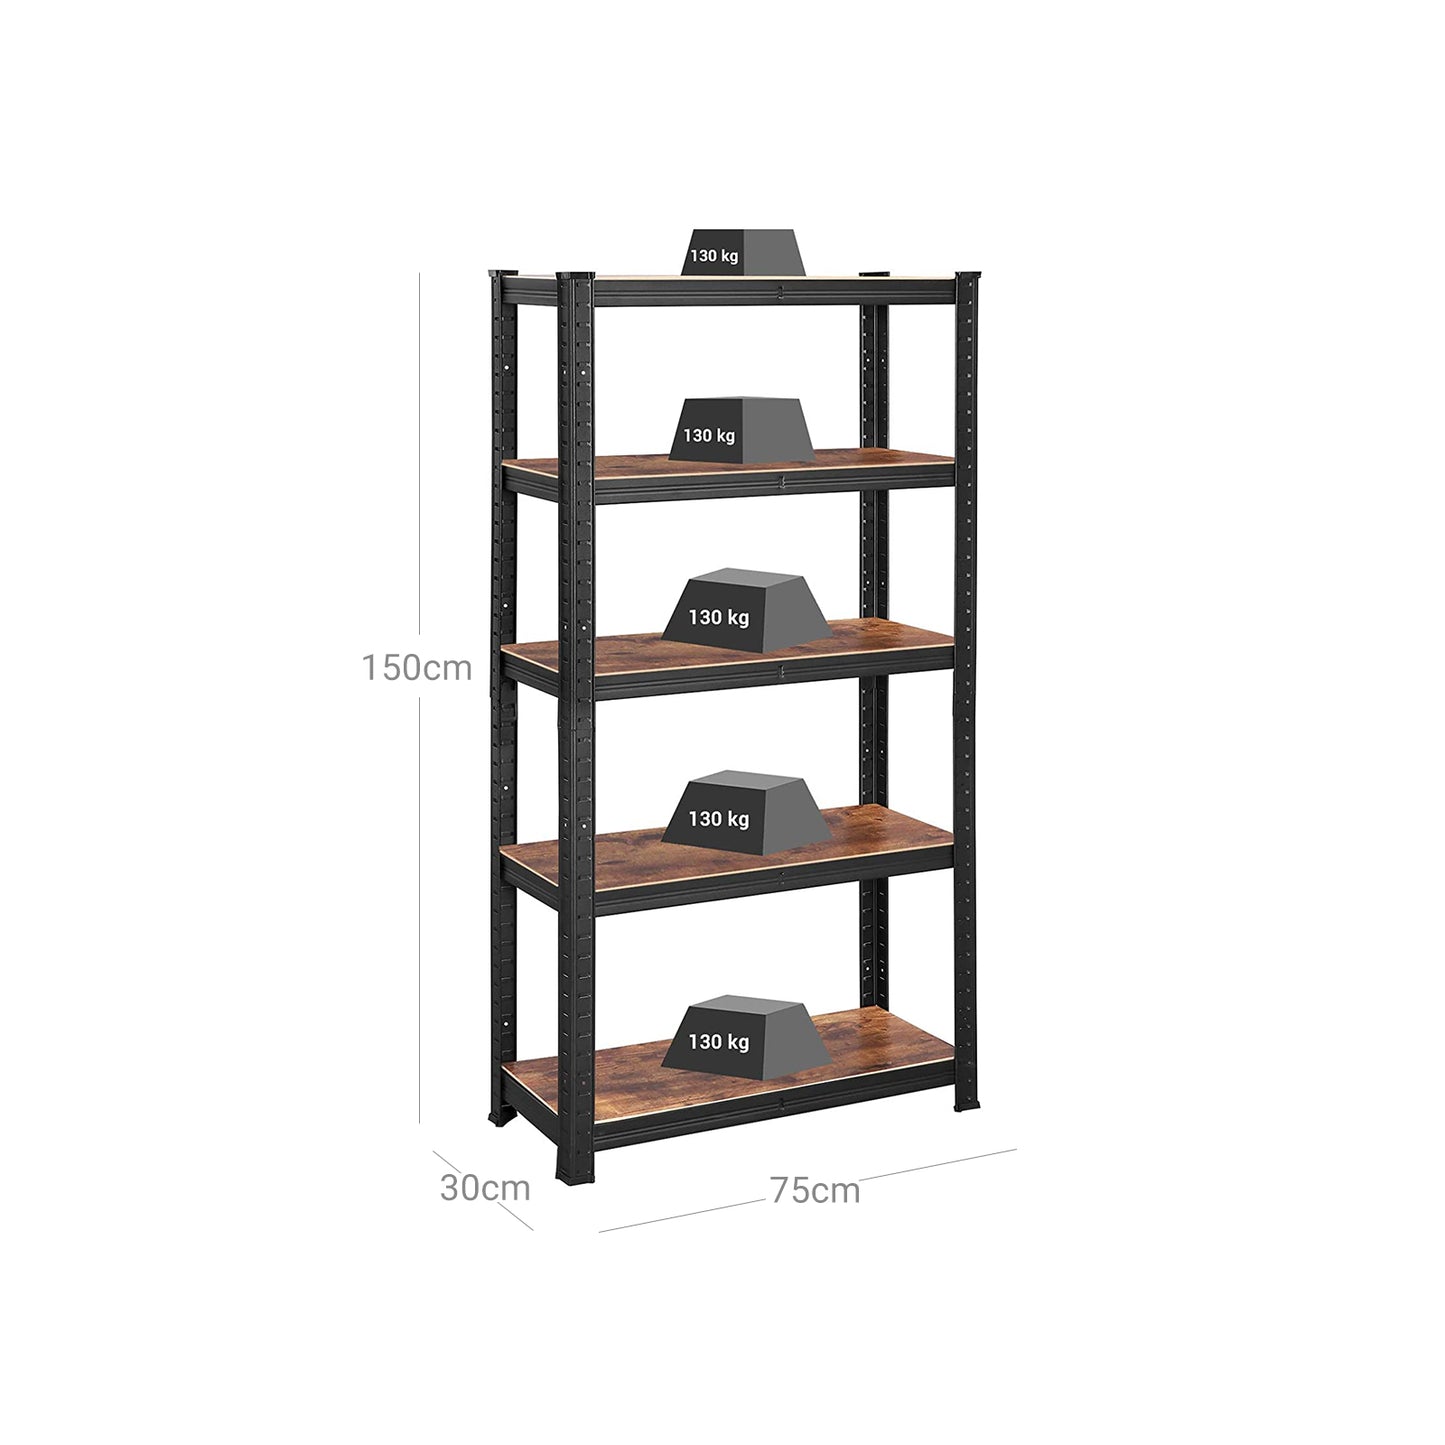 Shelving unit with a load capacity of up to 650 kg